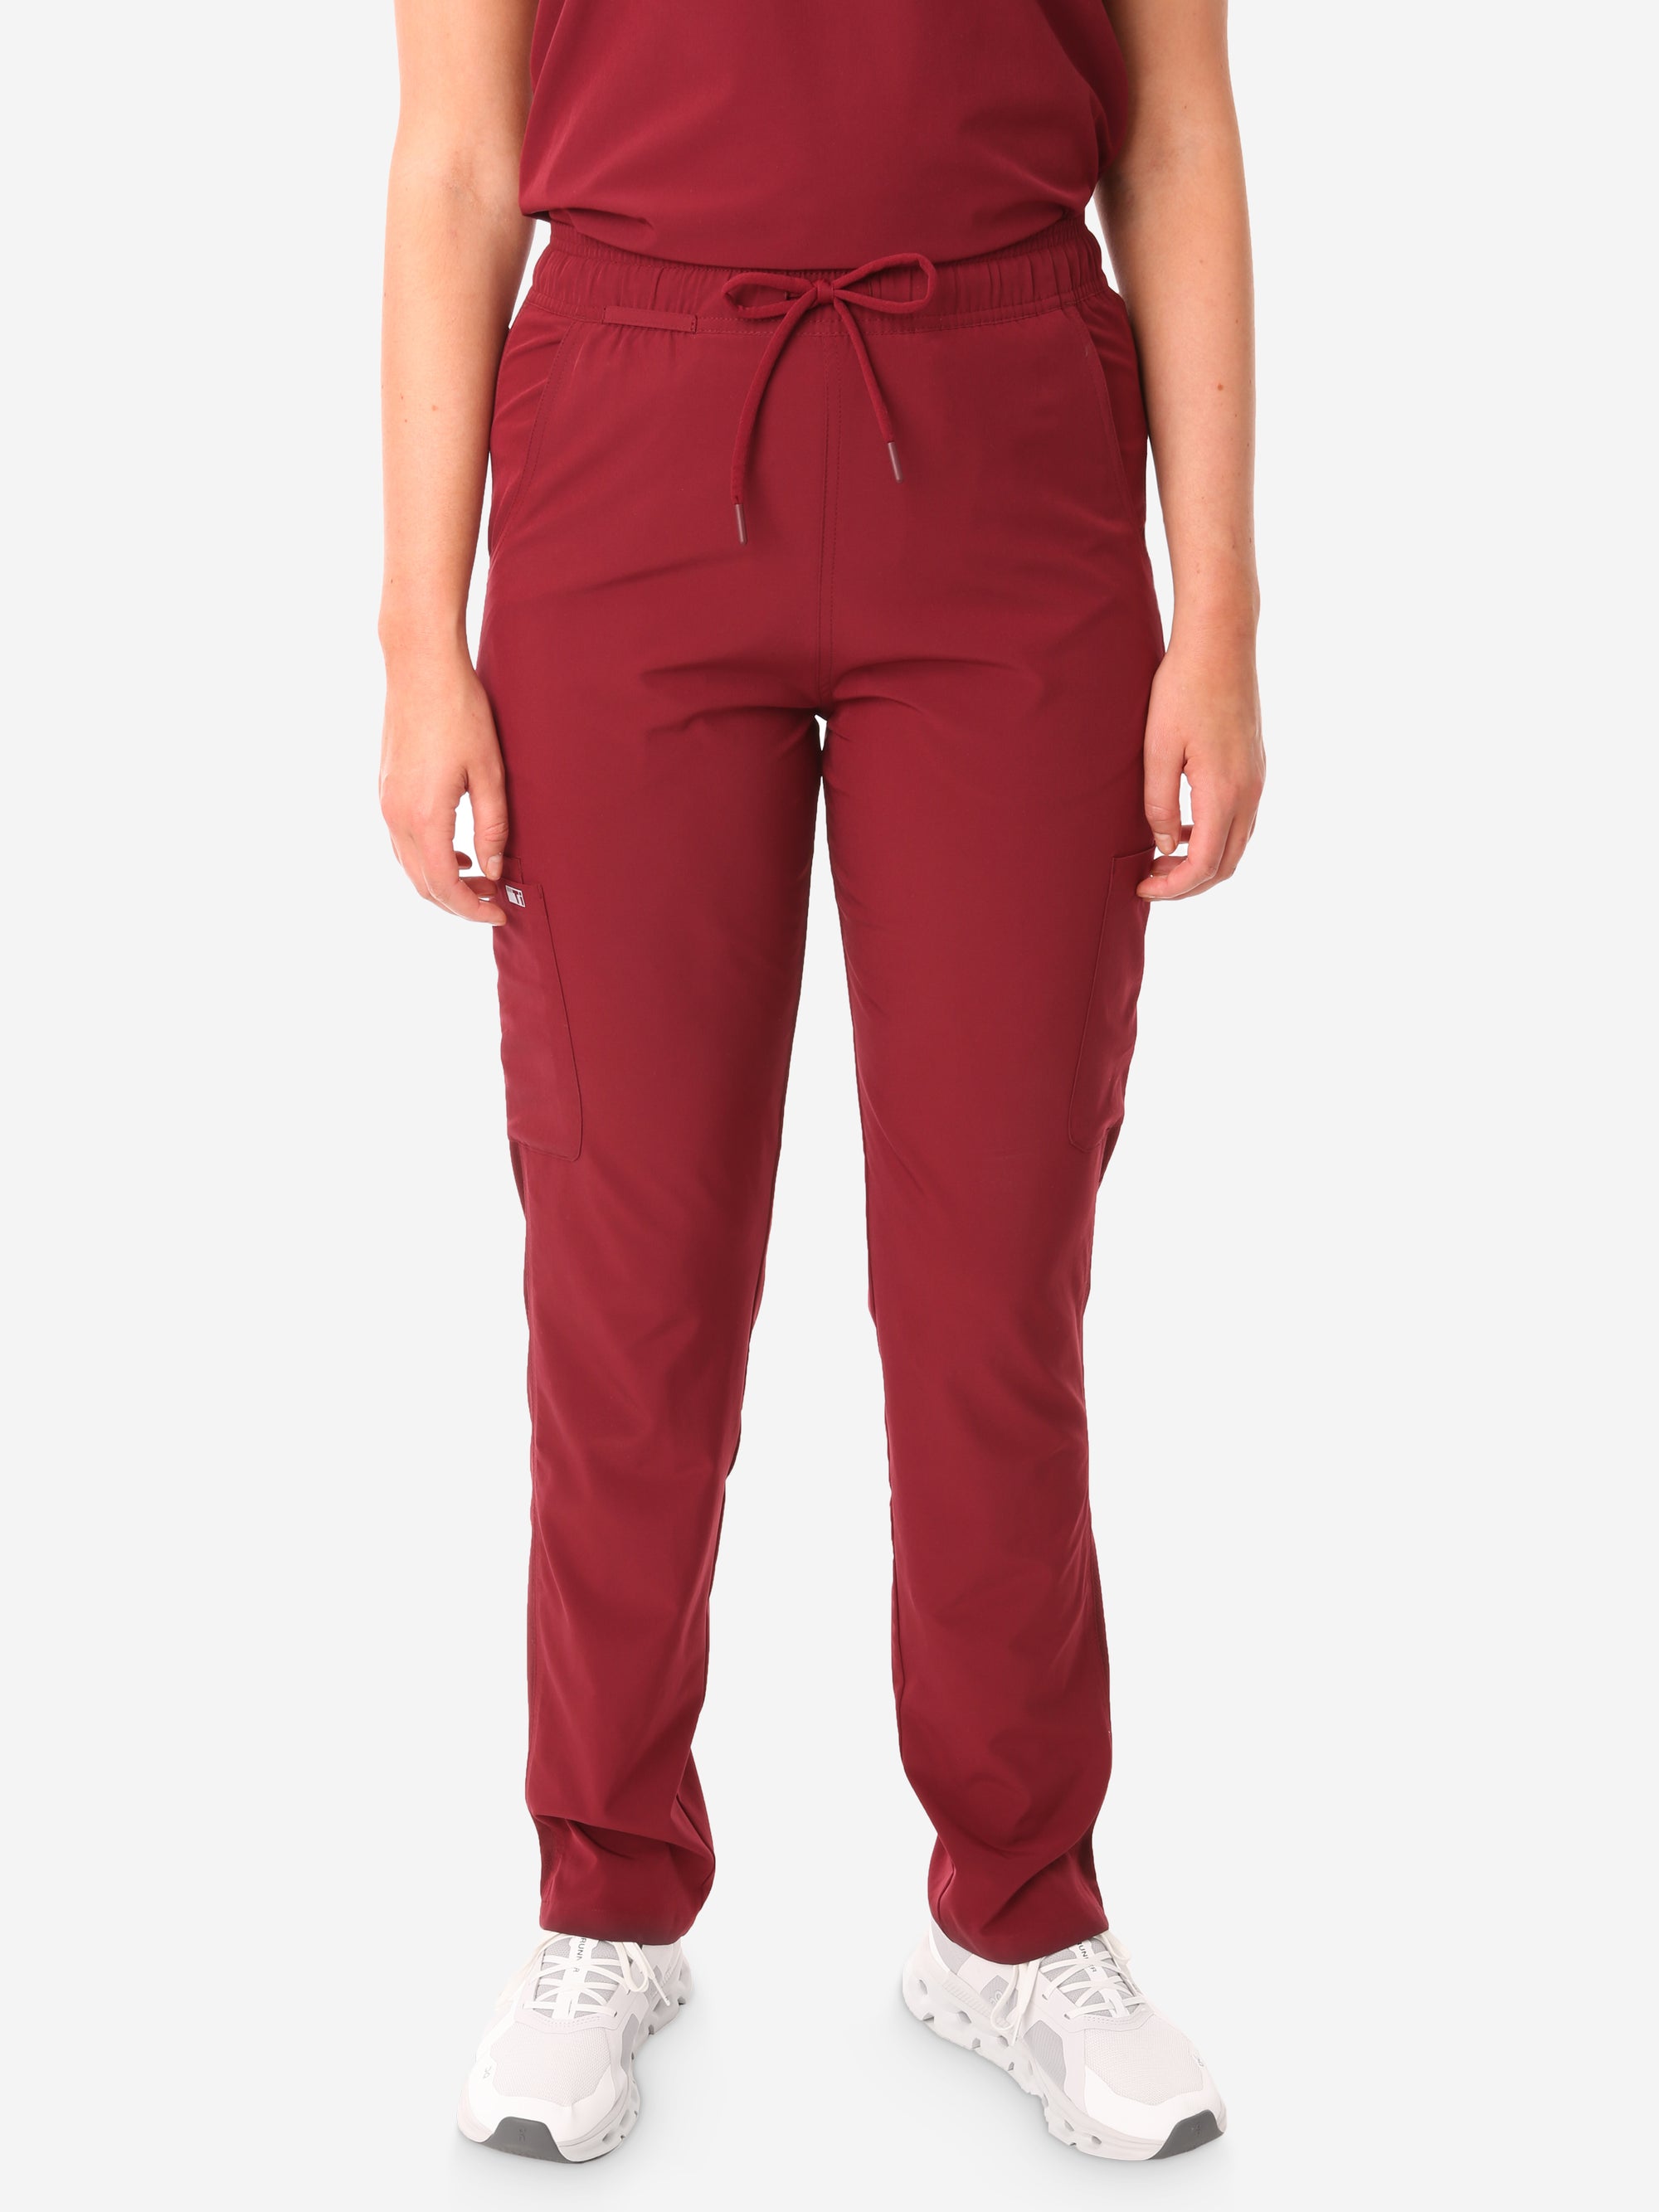 TiScrubs Bold Burgundy Women's Stretch 9-Pocket Pants Front View Pants Only